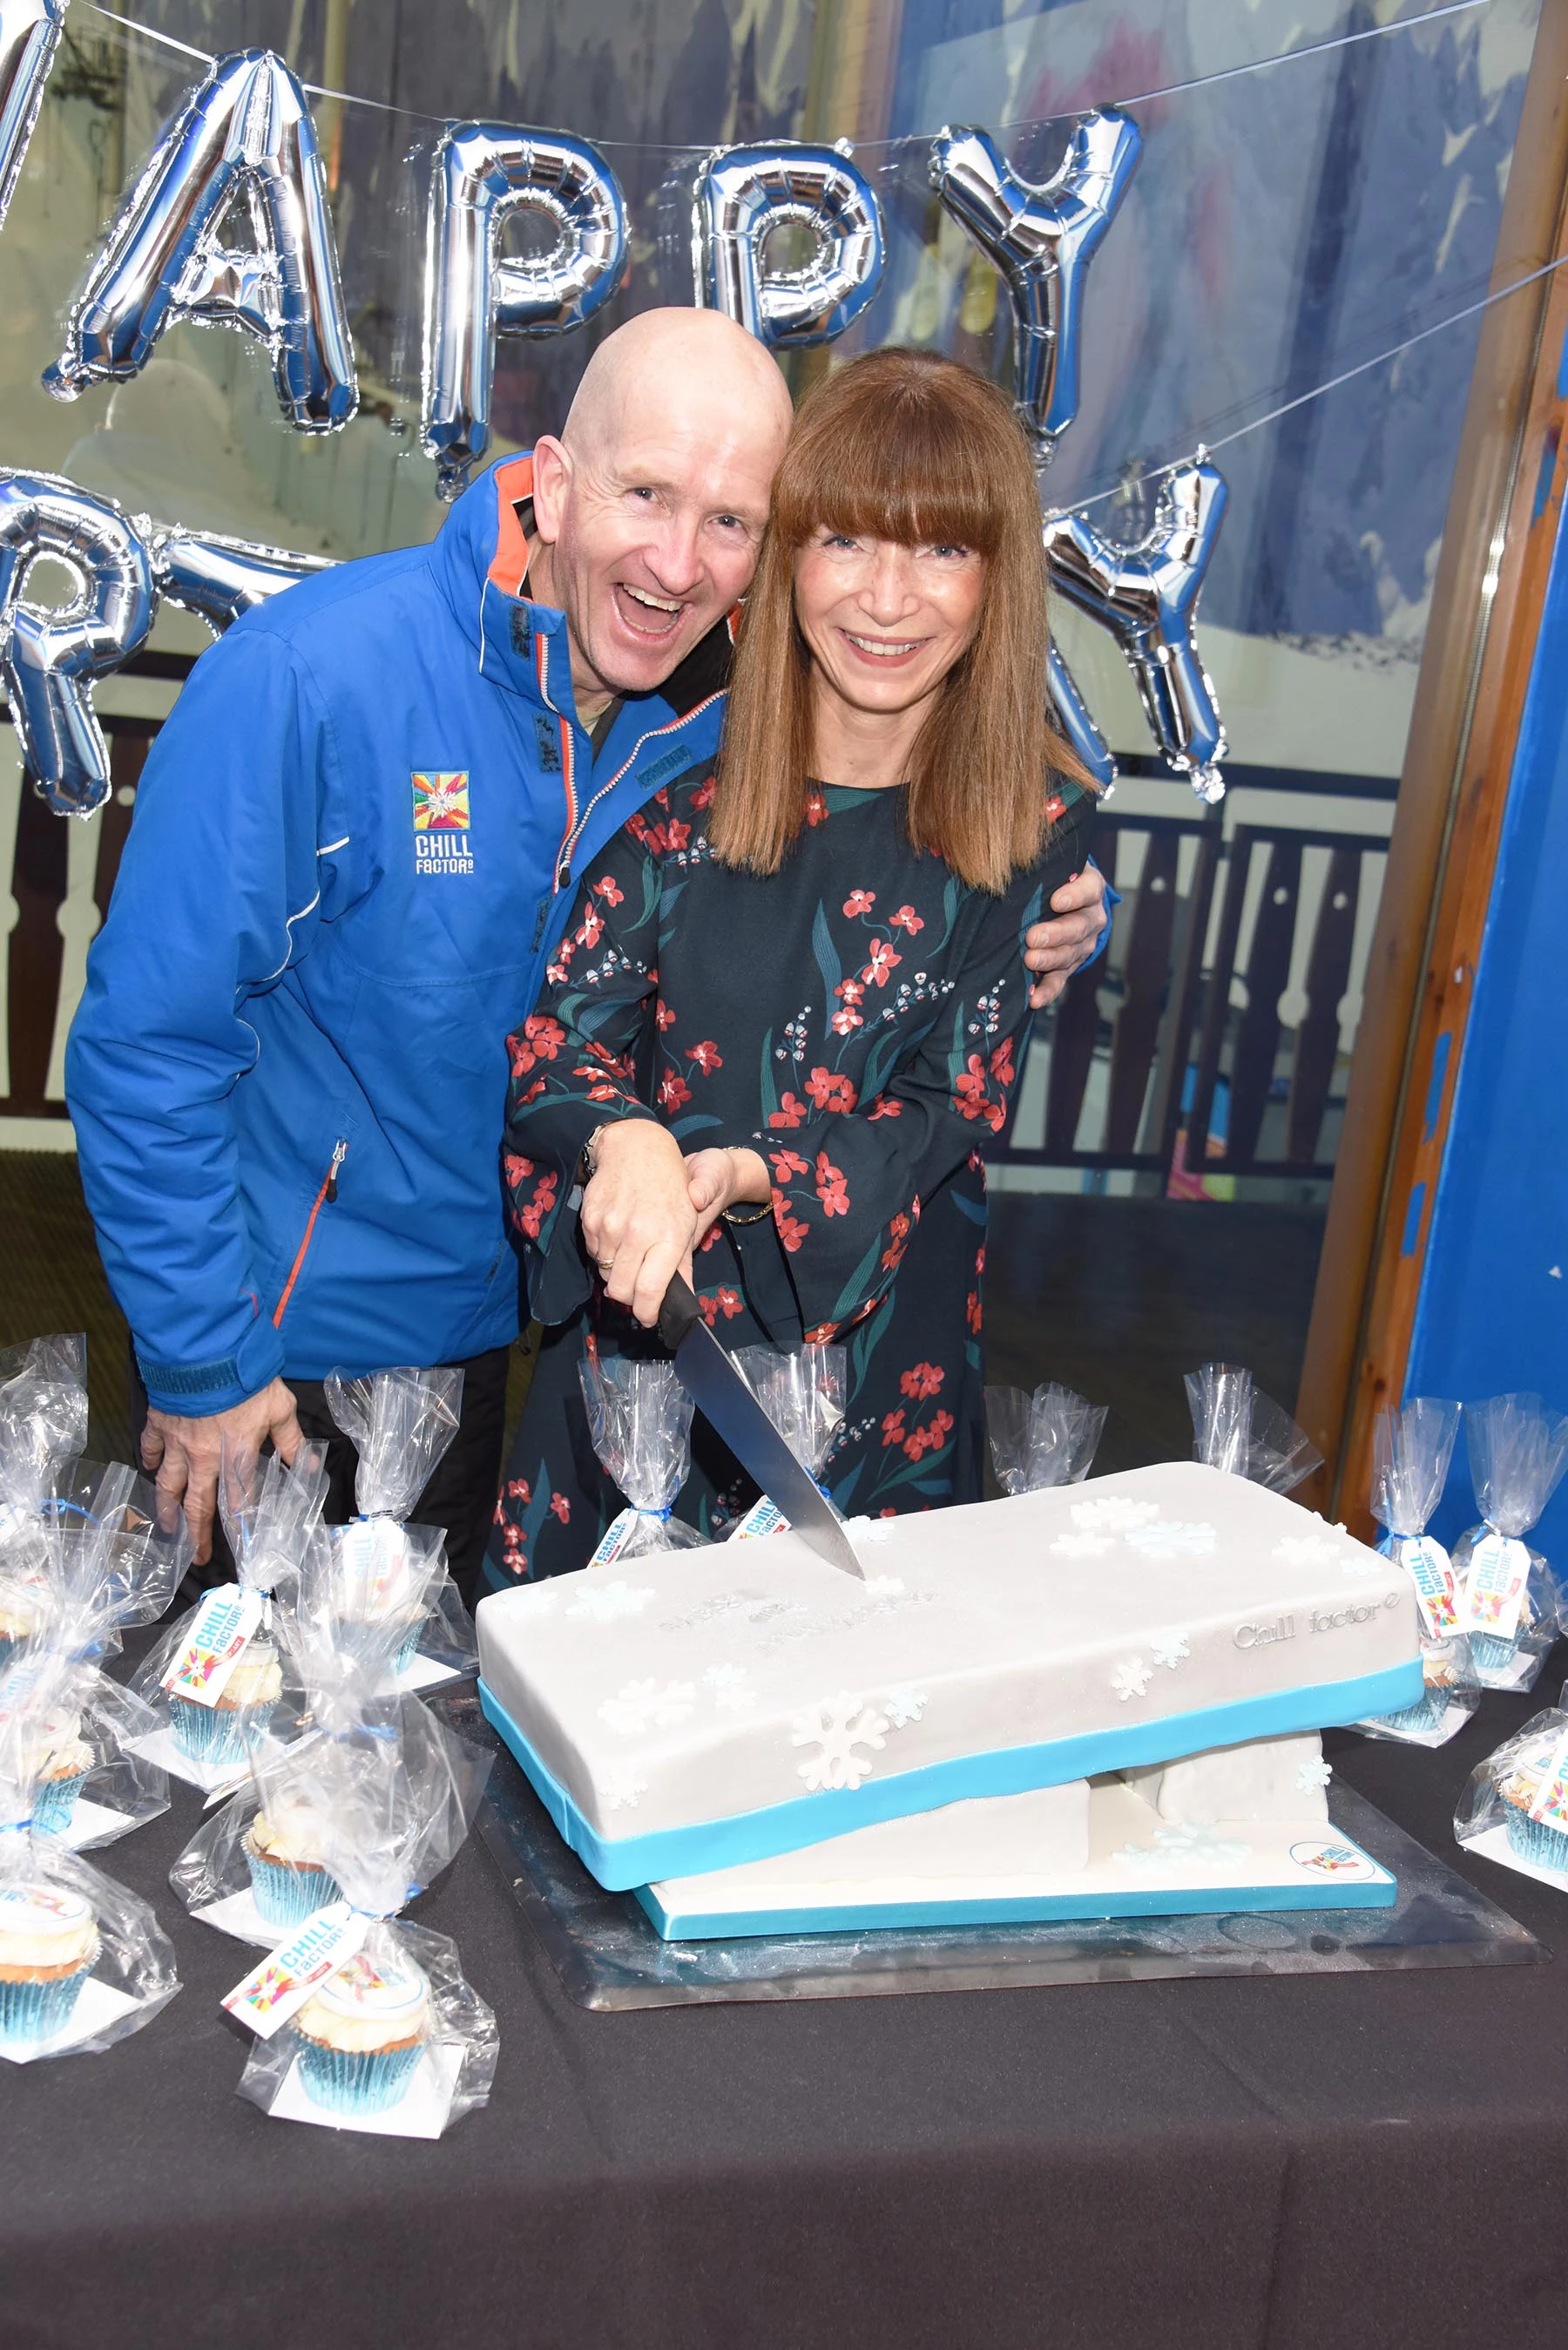 Eddie the Eagle and Chill Factore CEO Morwenna Angove cut the 10th Anniversary Cake